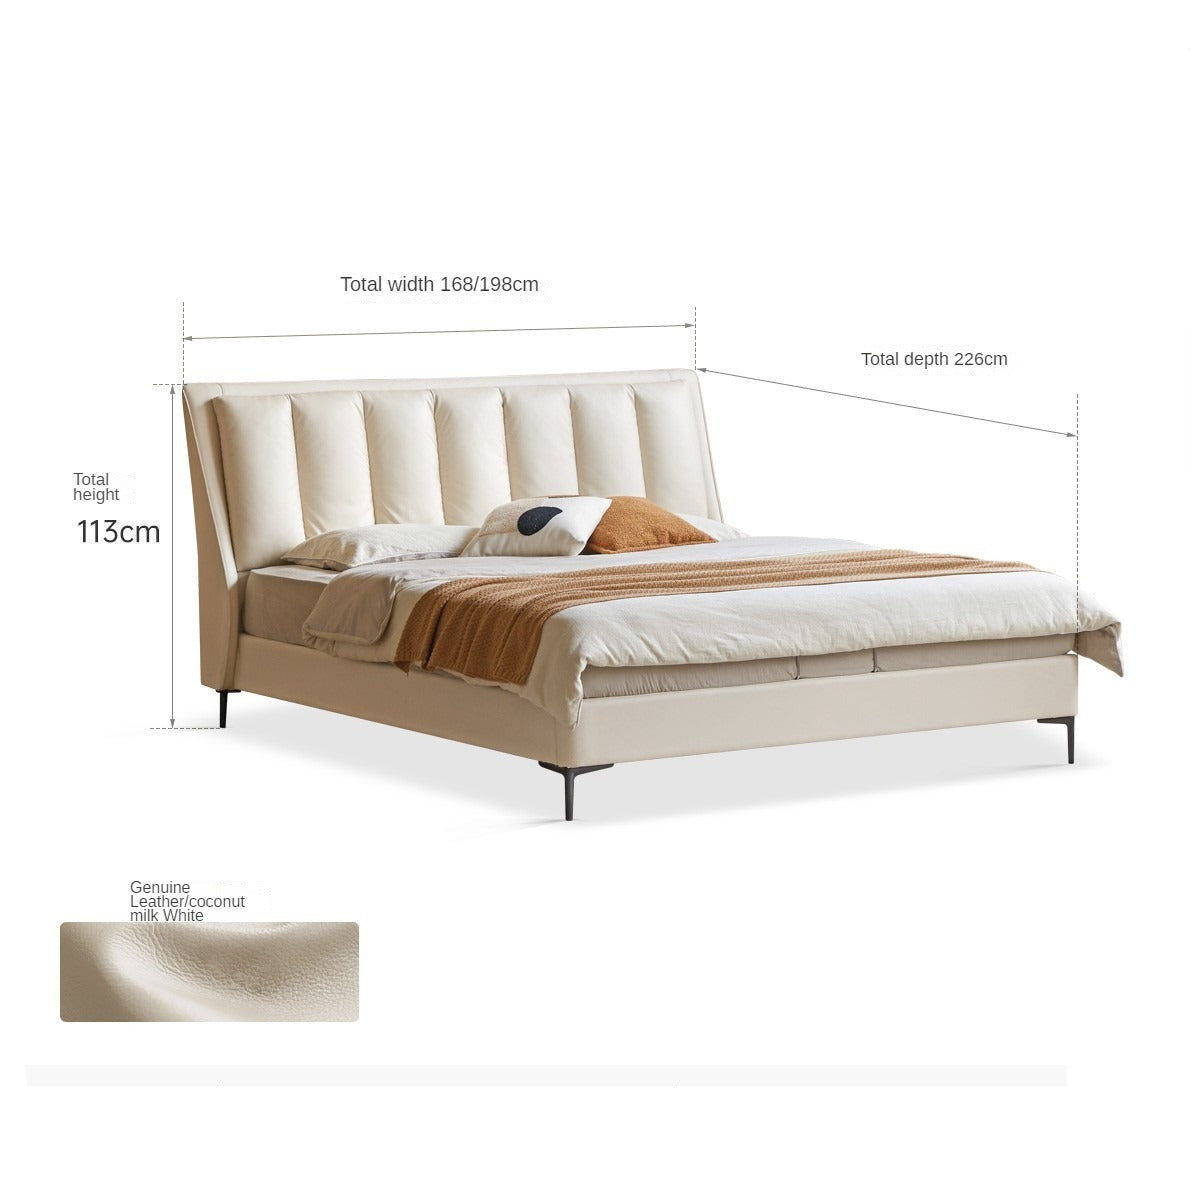 Genuine leather upholstered White Goose Down Cream Style Edge Bed"